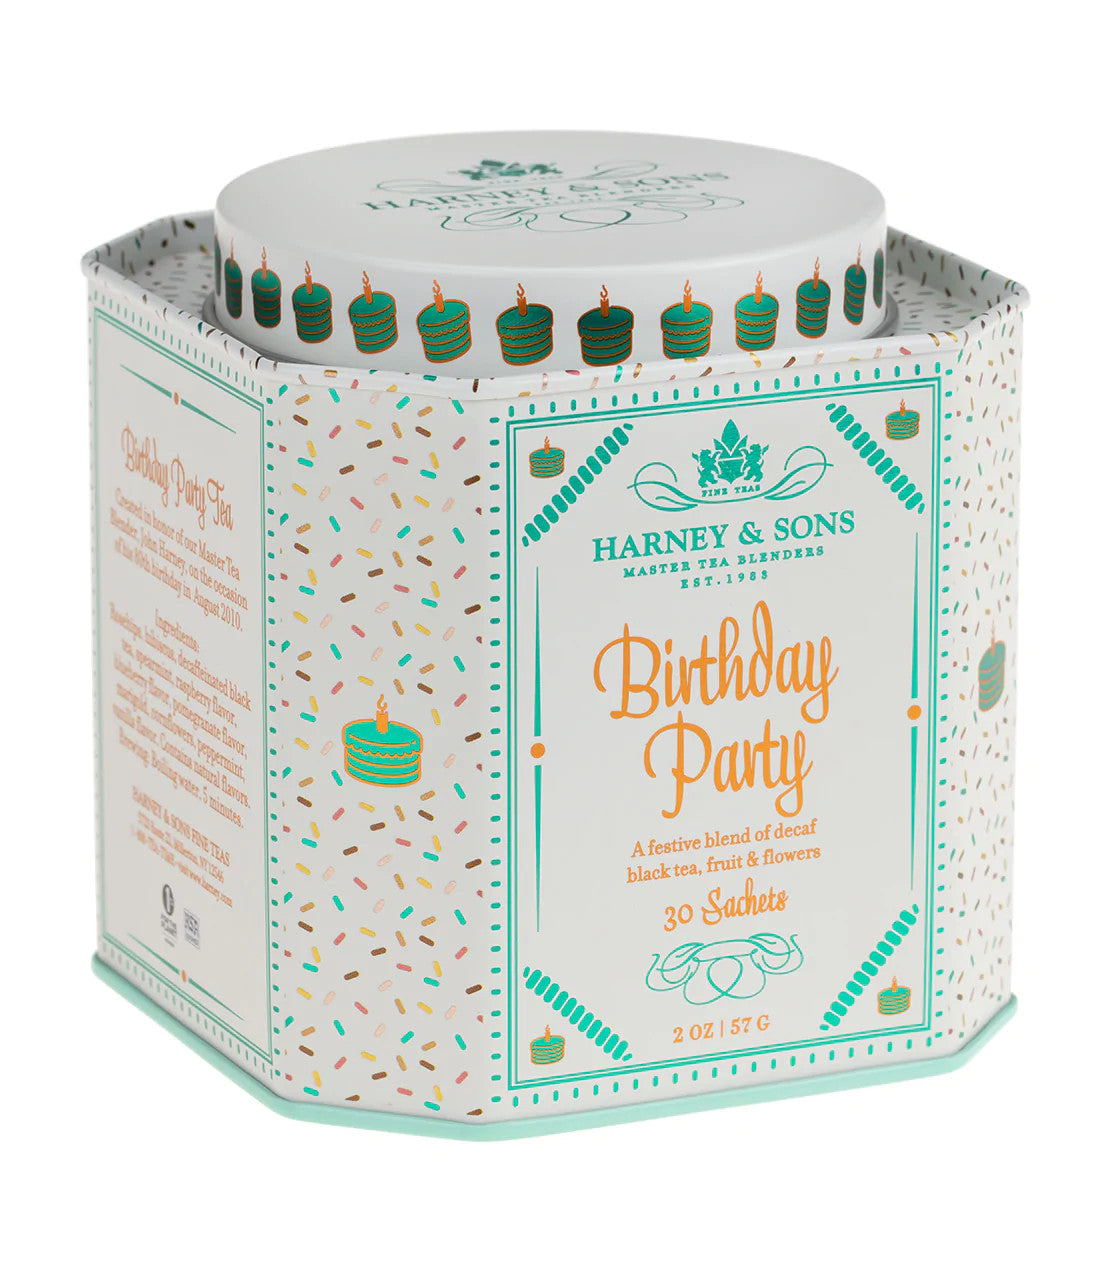 Birthday Party Decaf Tea by Harney & Sons.